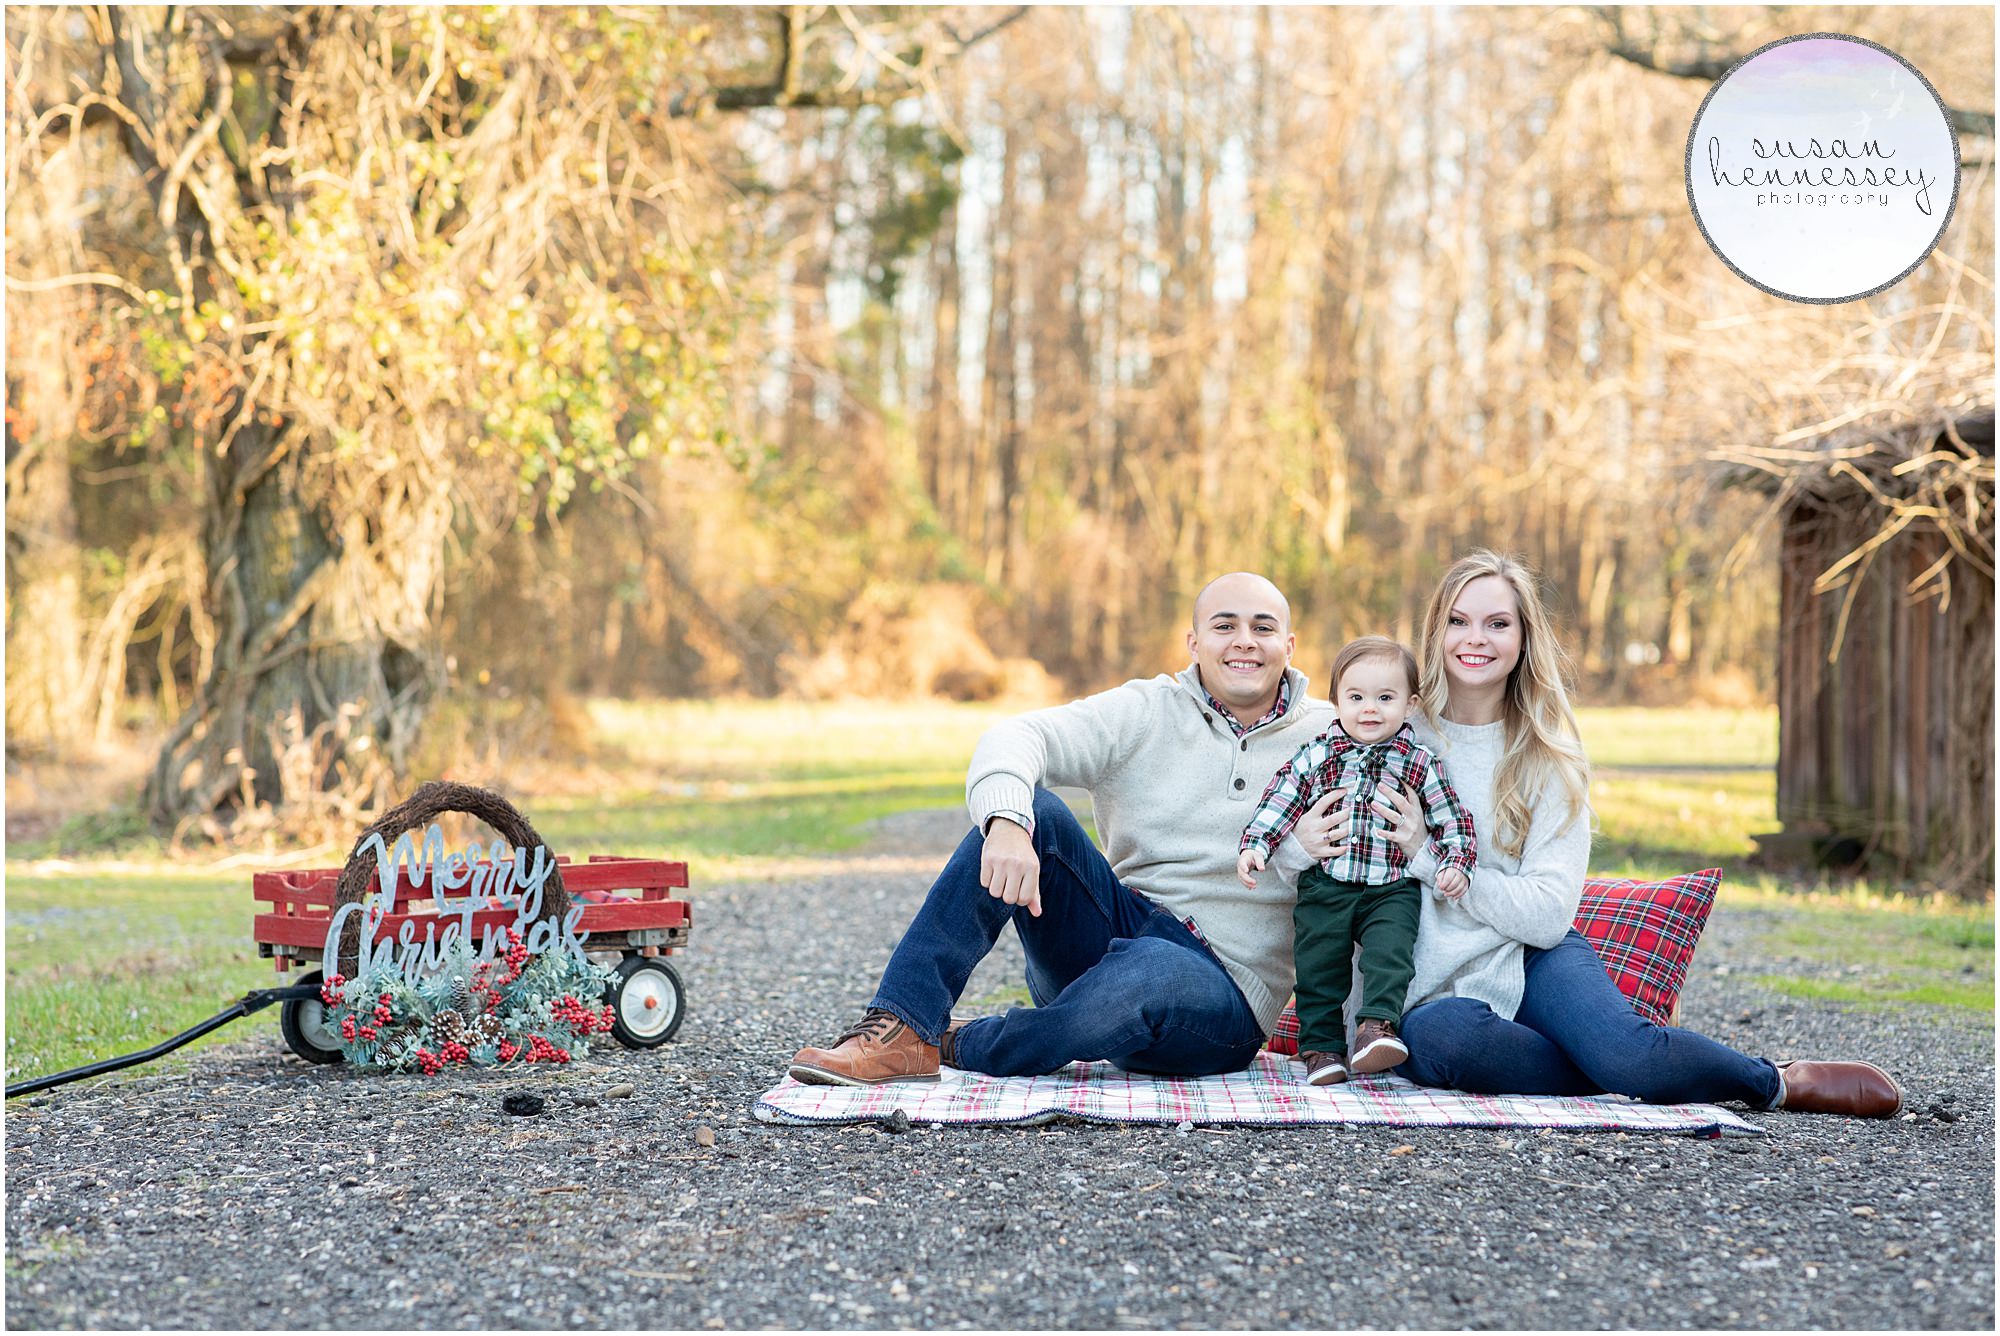 Susan Hennessey Photography, a photographer based in Moorestown photographs yearly South Jersey holiday family photo sessions in the Fall. 